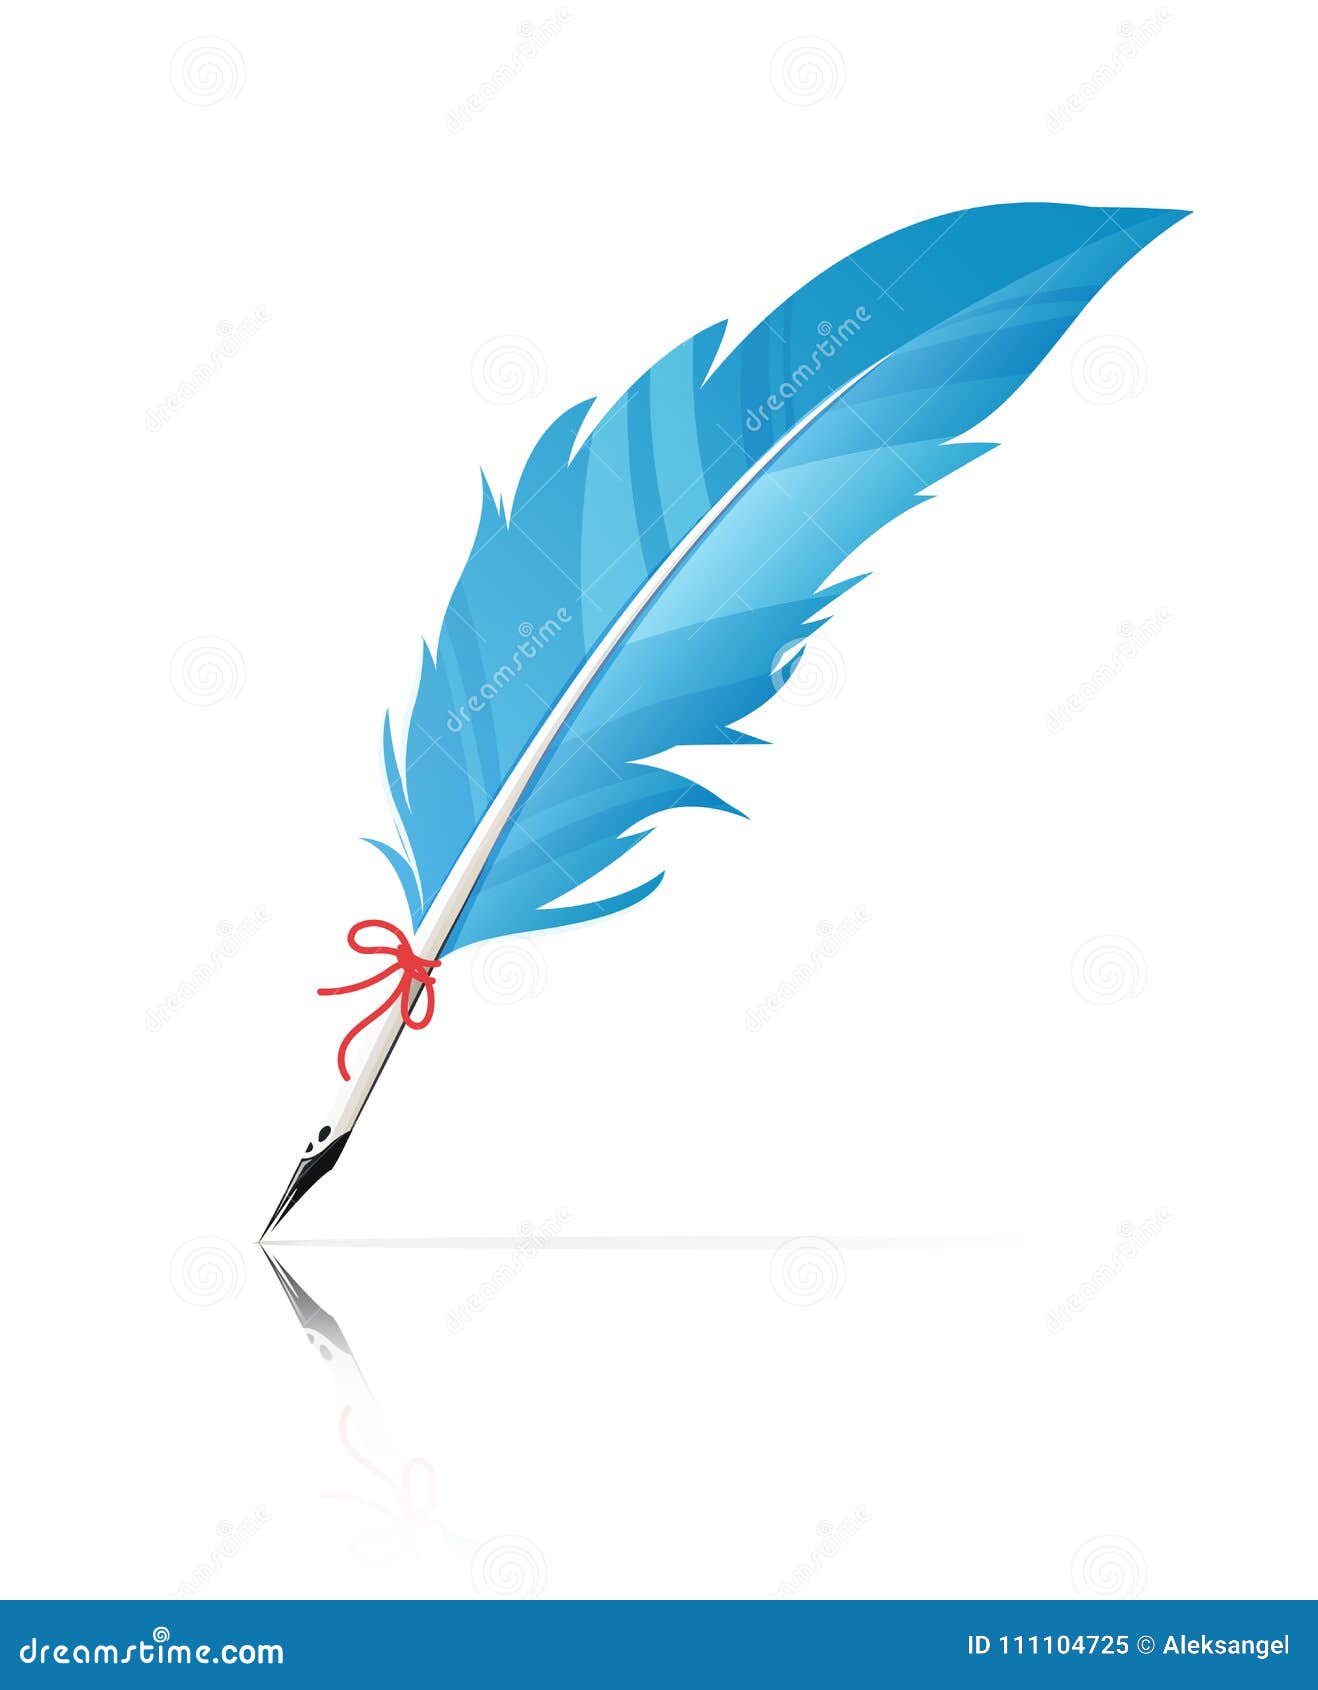 https://thumbs.dreamstime.com/z/feather-pen-vintage-calligraphy-graphic-art-tool-white-background-vector-illustration-111104725.jpg